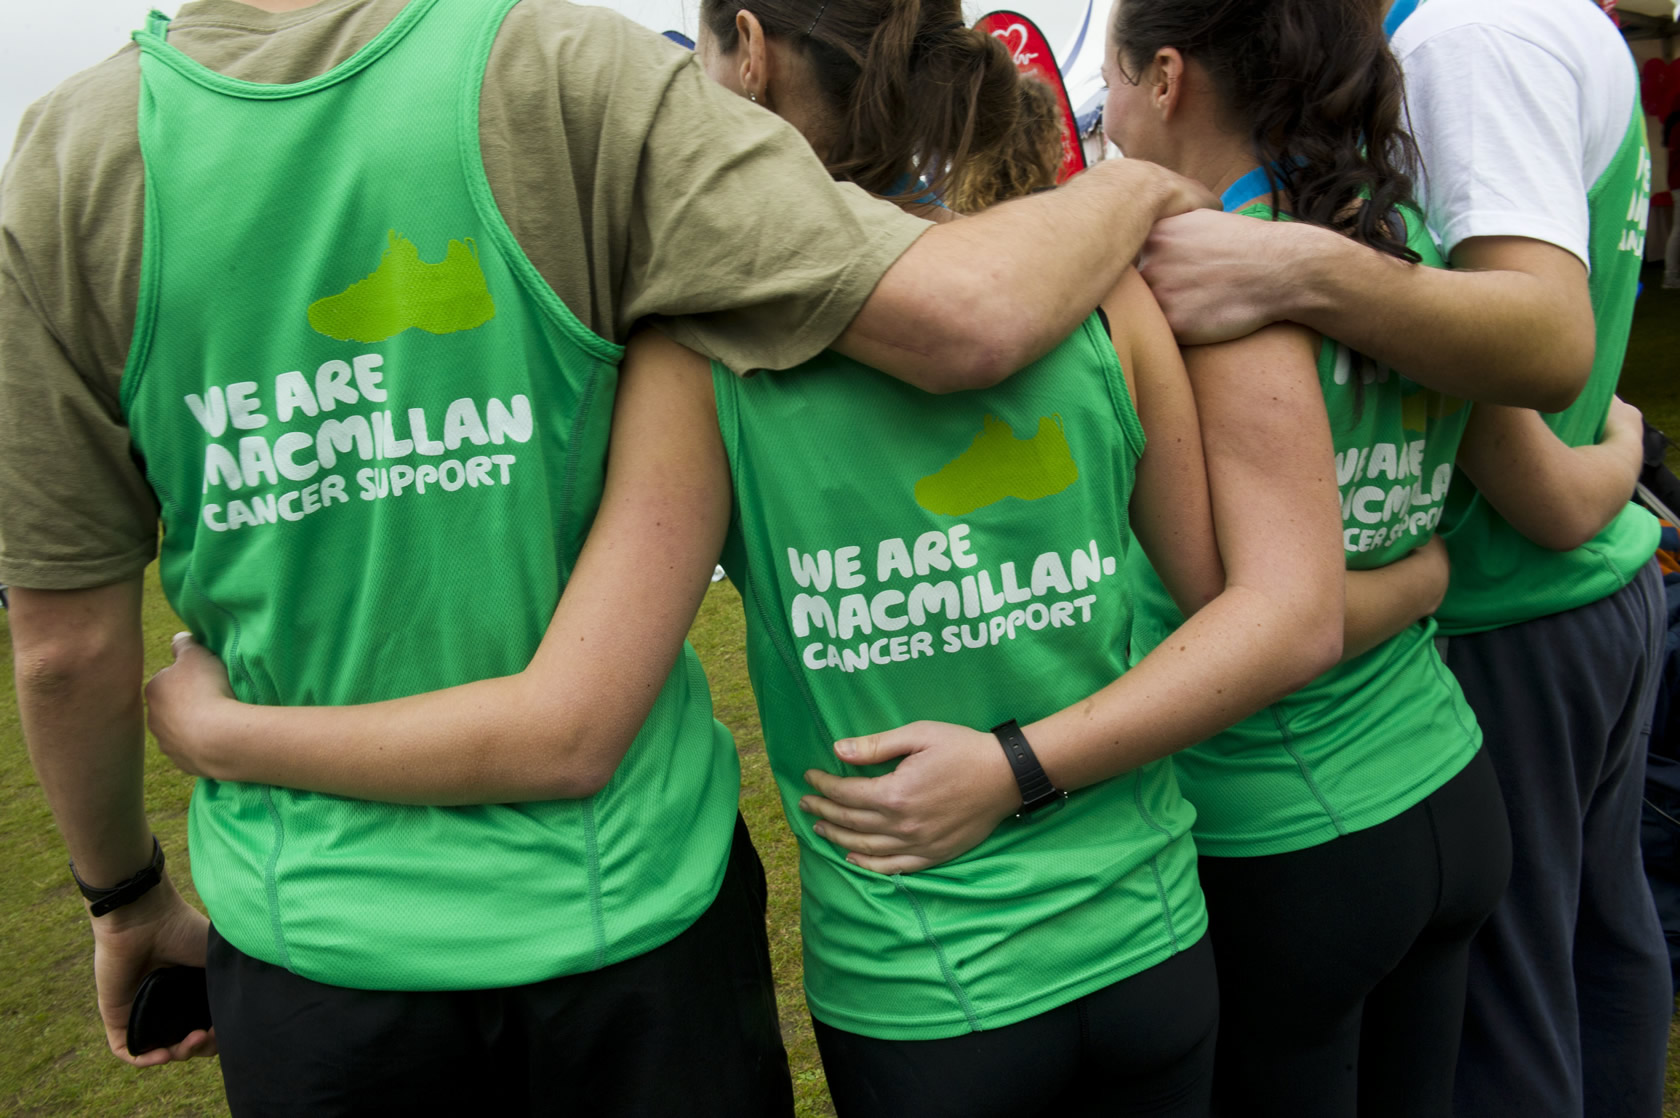 Macmillan Cancer Support announces new partnership with Home Retail Group to raise £3M by March 2017 through fundraising activities and events 